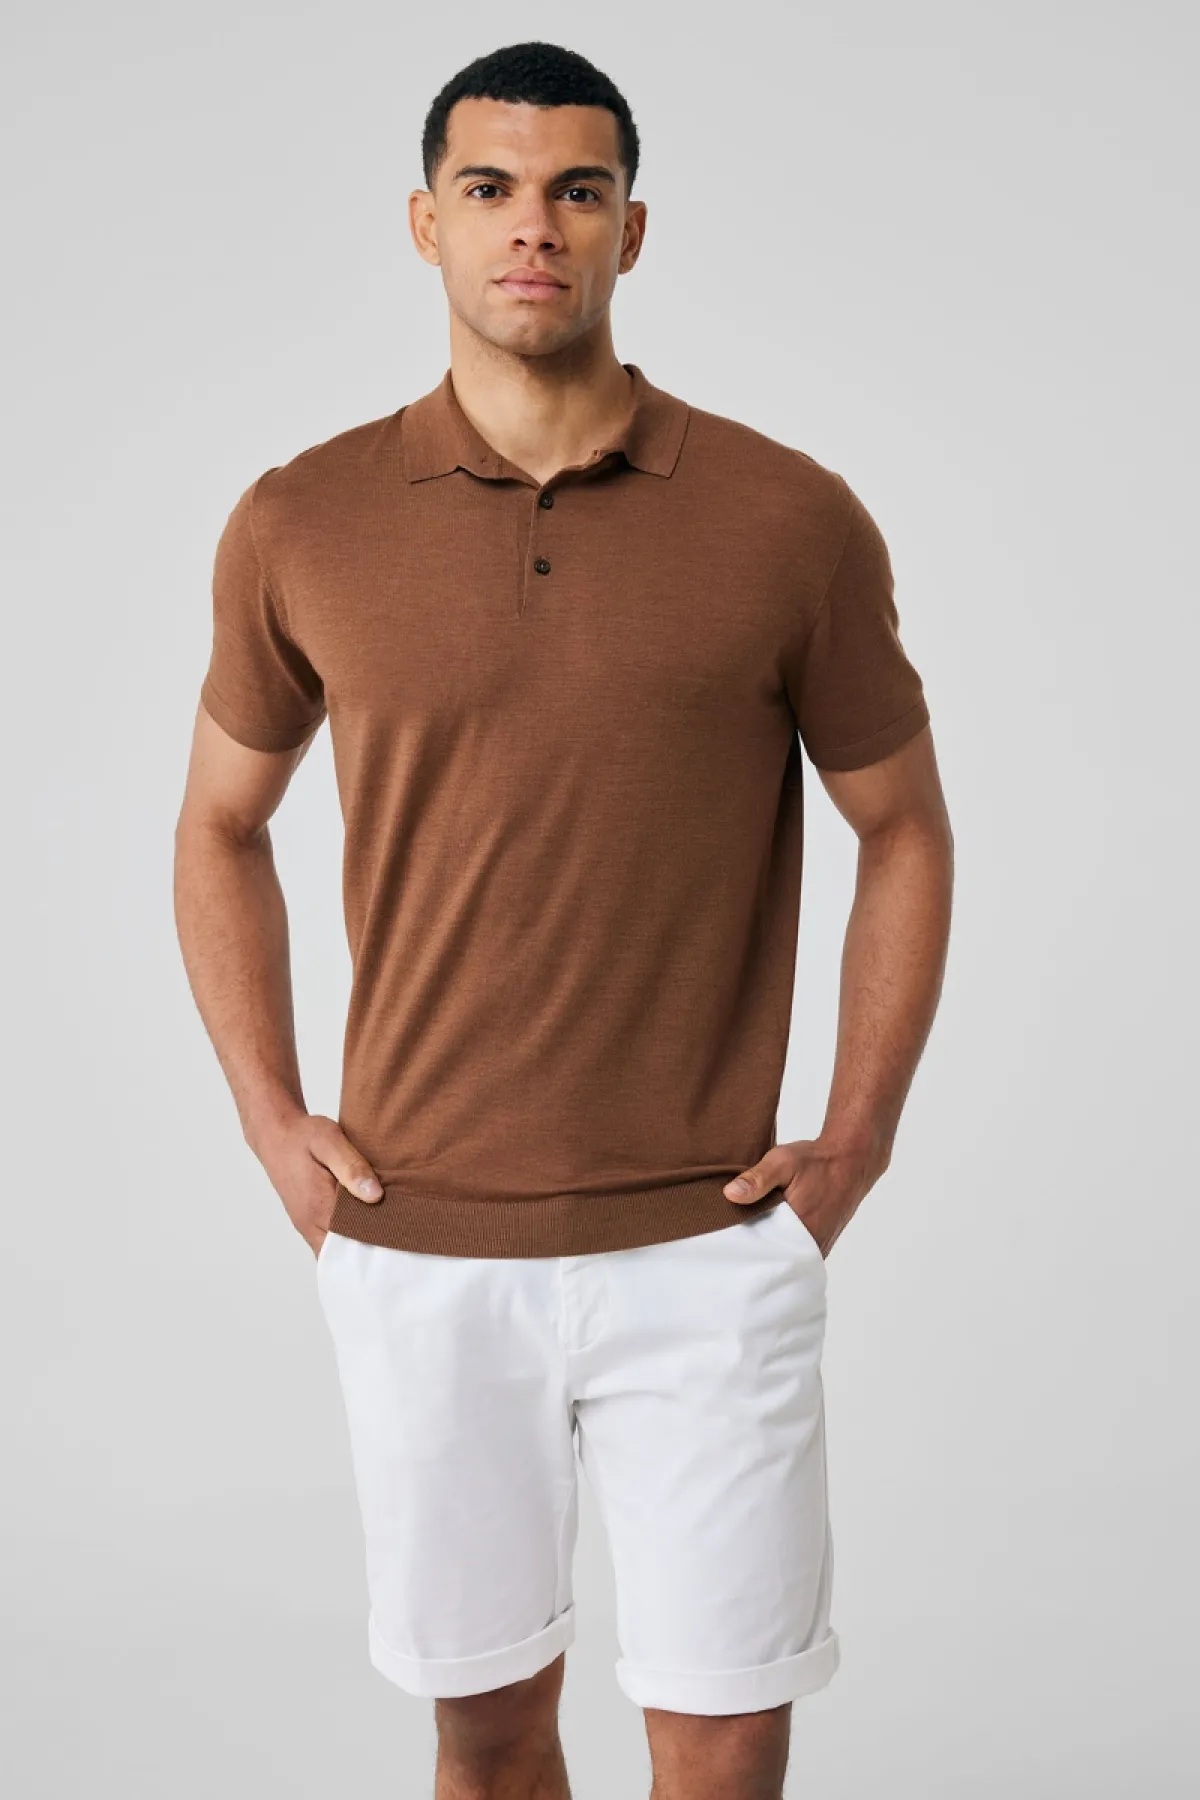 Beige gold polo